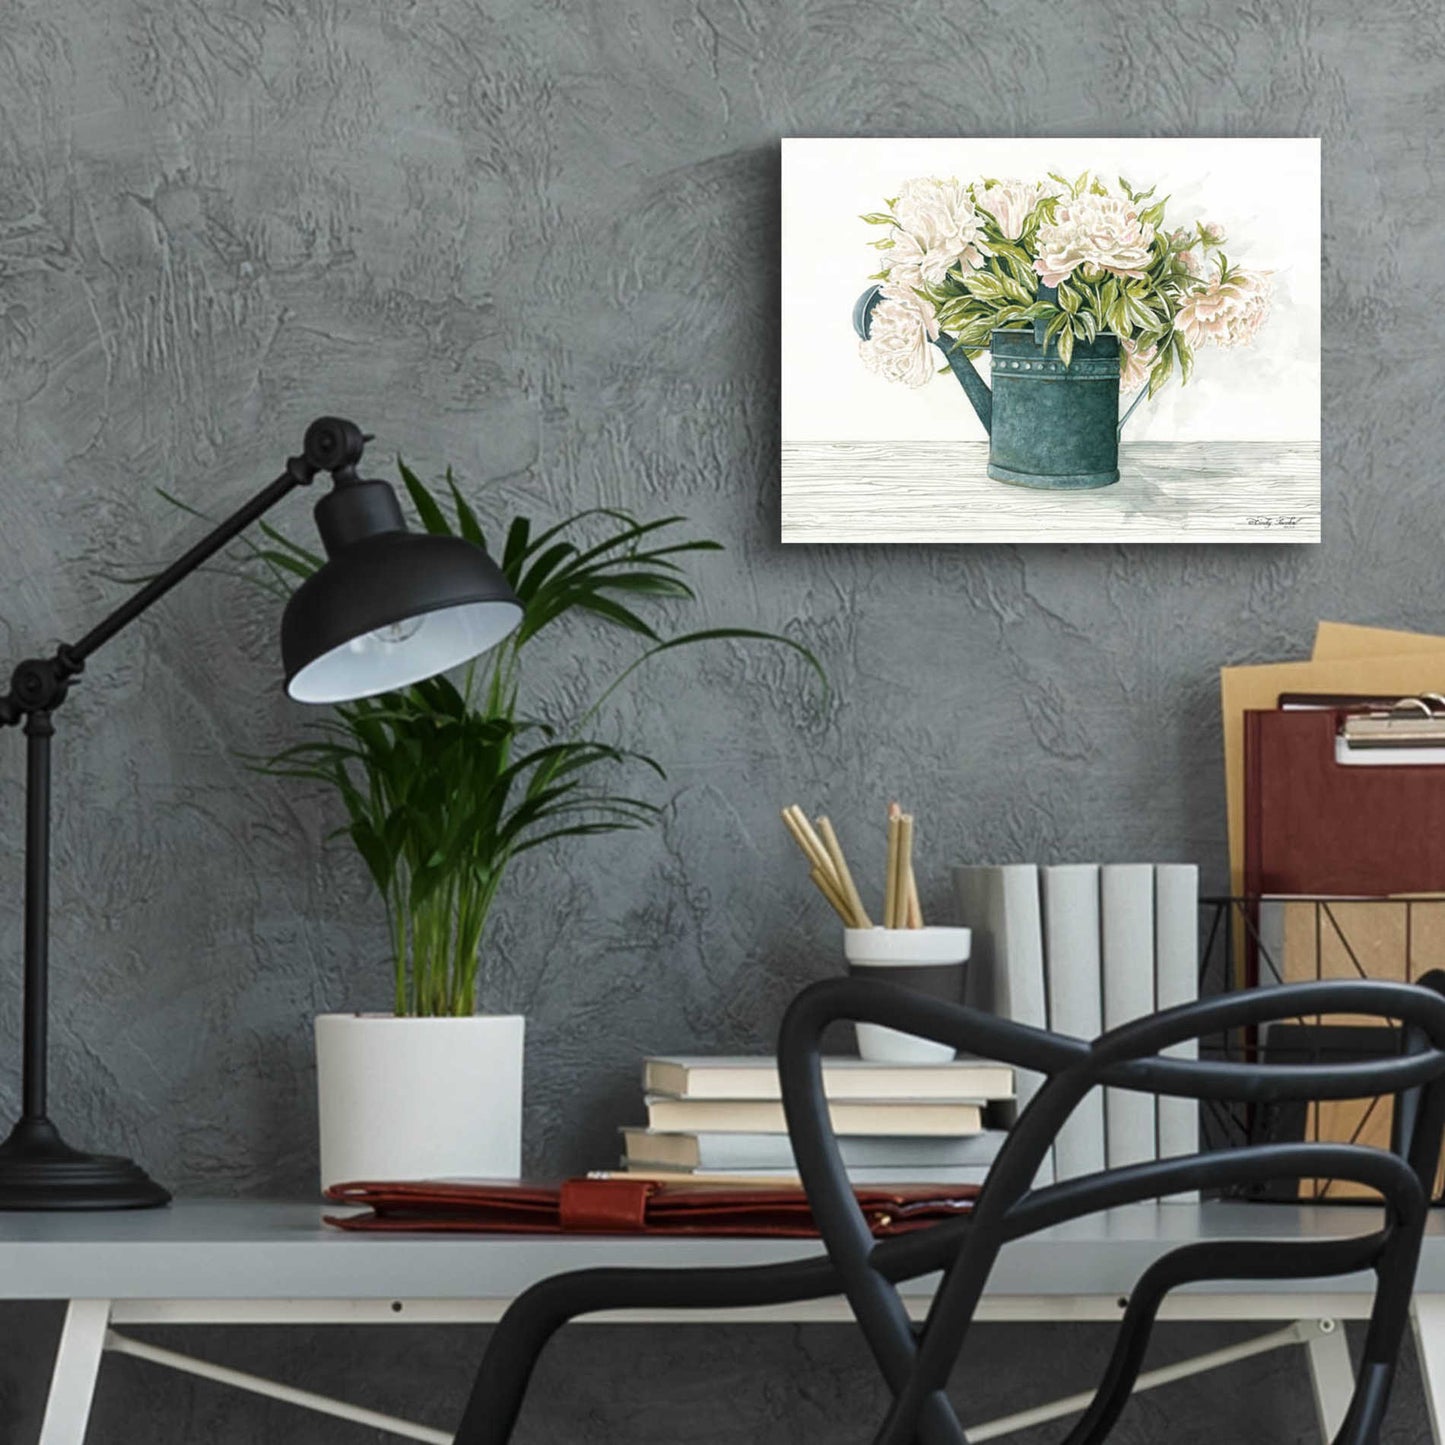 Epic Art 'Galvanized Watering Can Peonies' by Cindy Jacobs, Acrylic Glass Wall Art,16x12